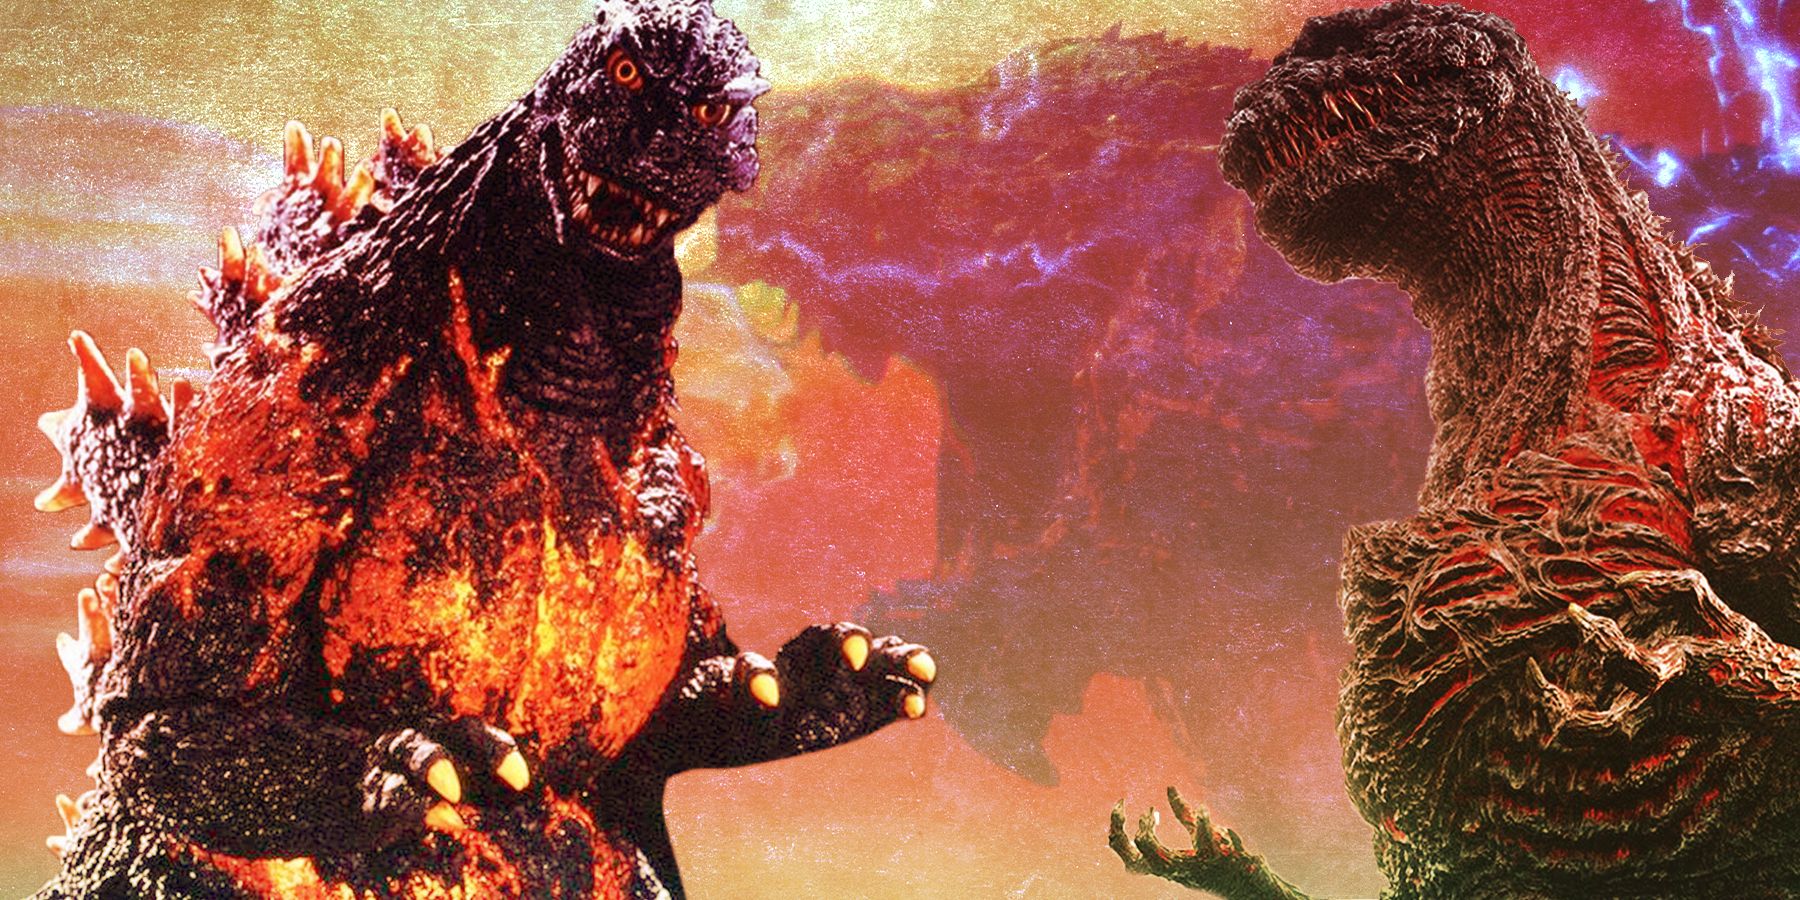 a collage of various versions of Godzilla against a faded orange background